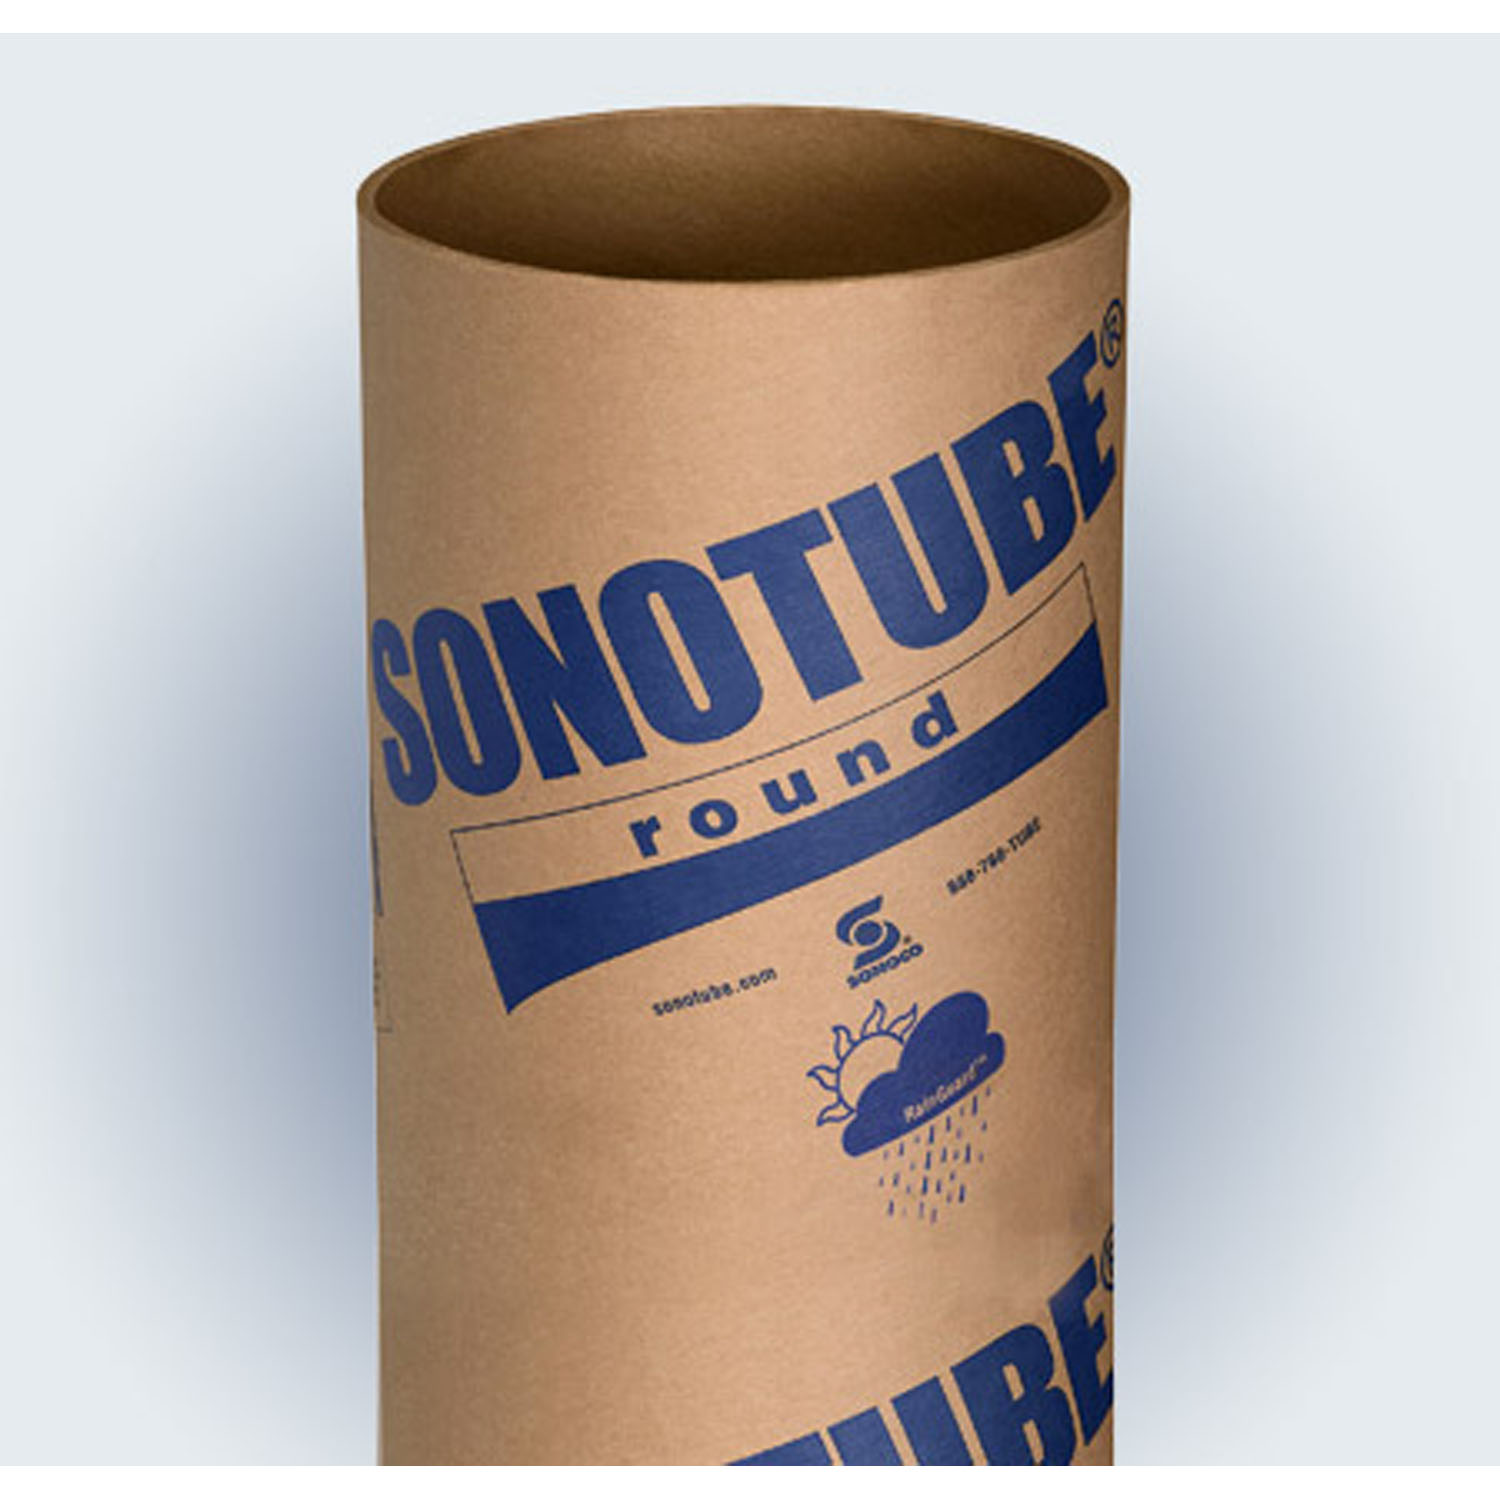 24 INCH X 12 FOOT SONOTUBE CONCRETE FORMING TUBE